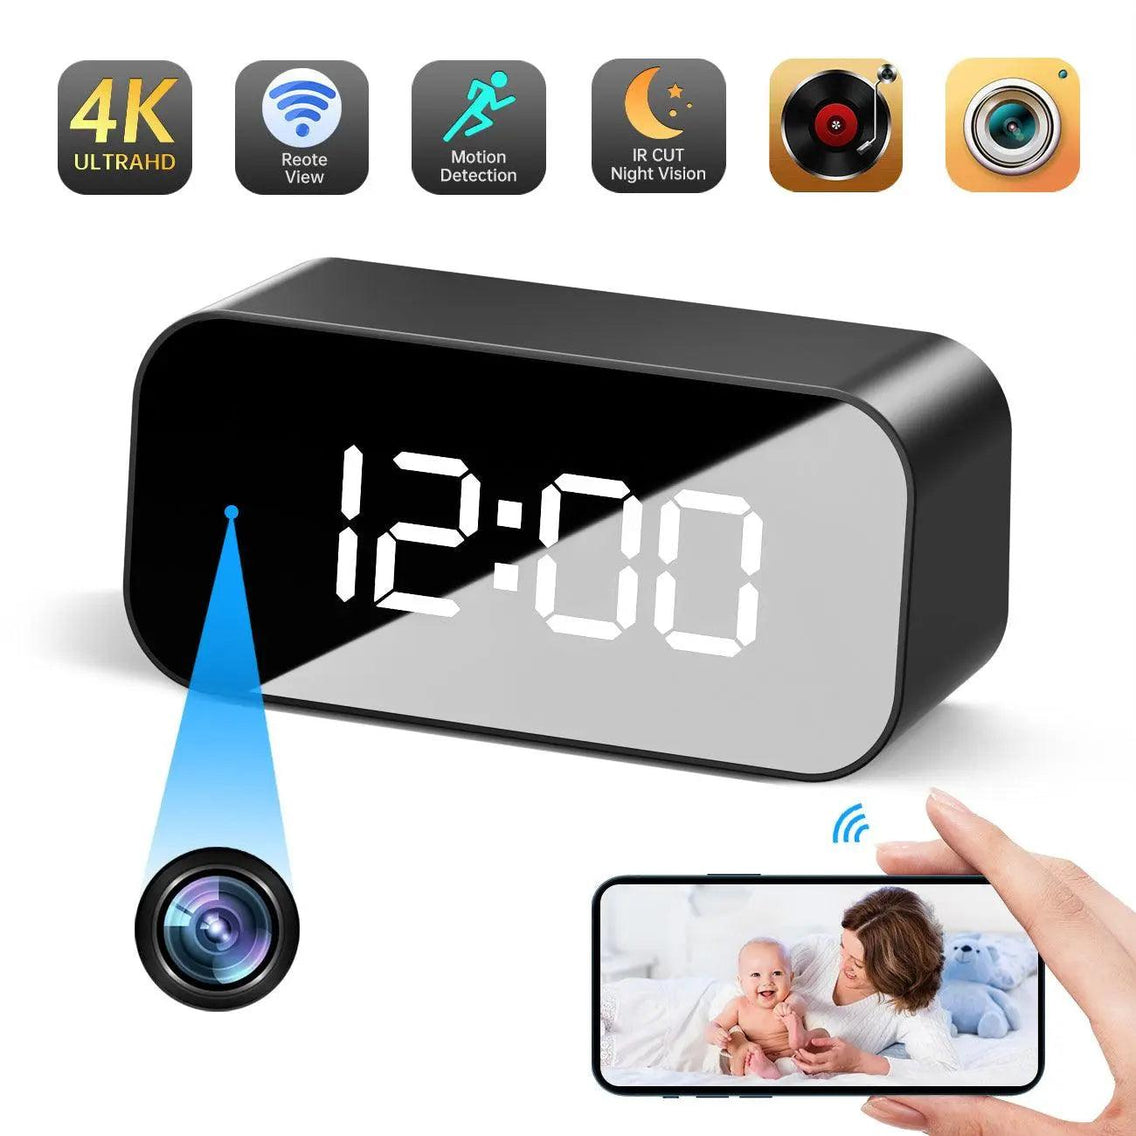 Smart WiFi Spy Camera Clock with 4K Ultra HD Video, 166-Degree Wide-Angle Lens, Night Vision, Motion Detection Alarm - Swayfer Tech